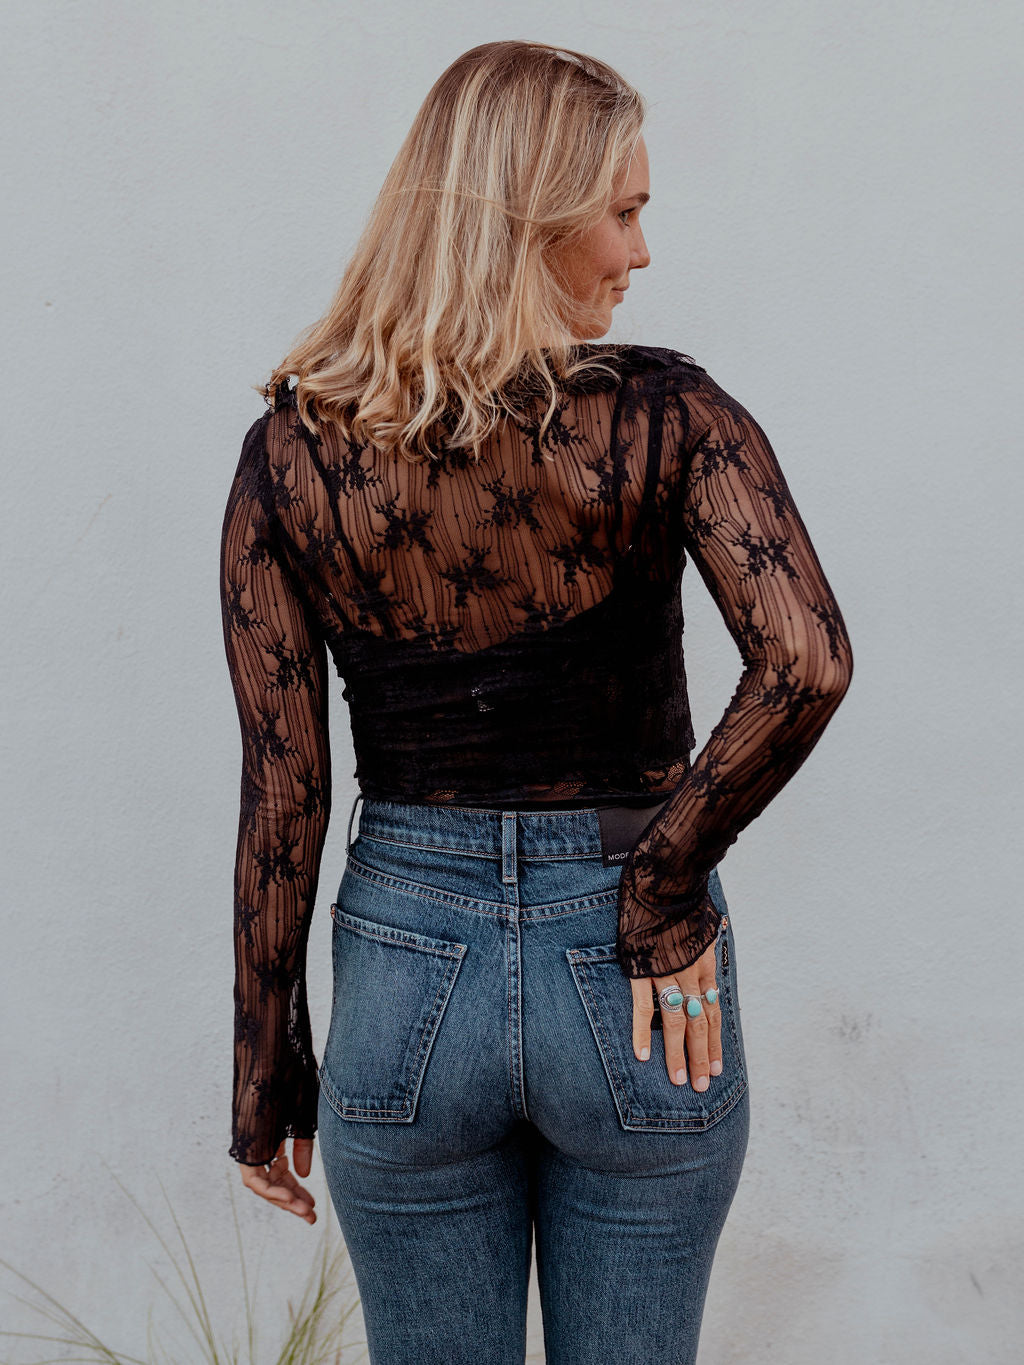 Floral Lace Top with Ruffle Neckline